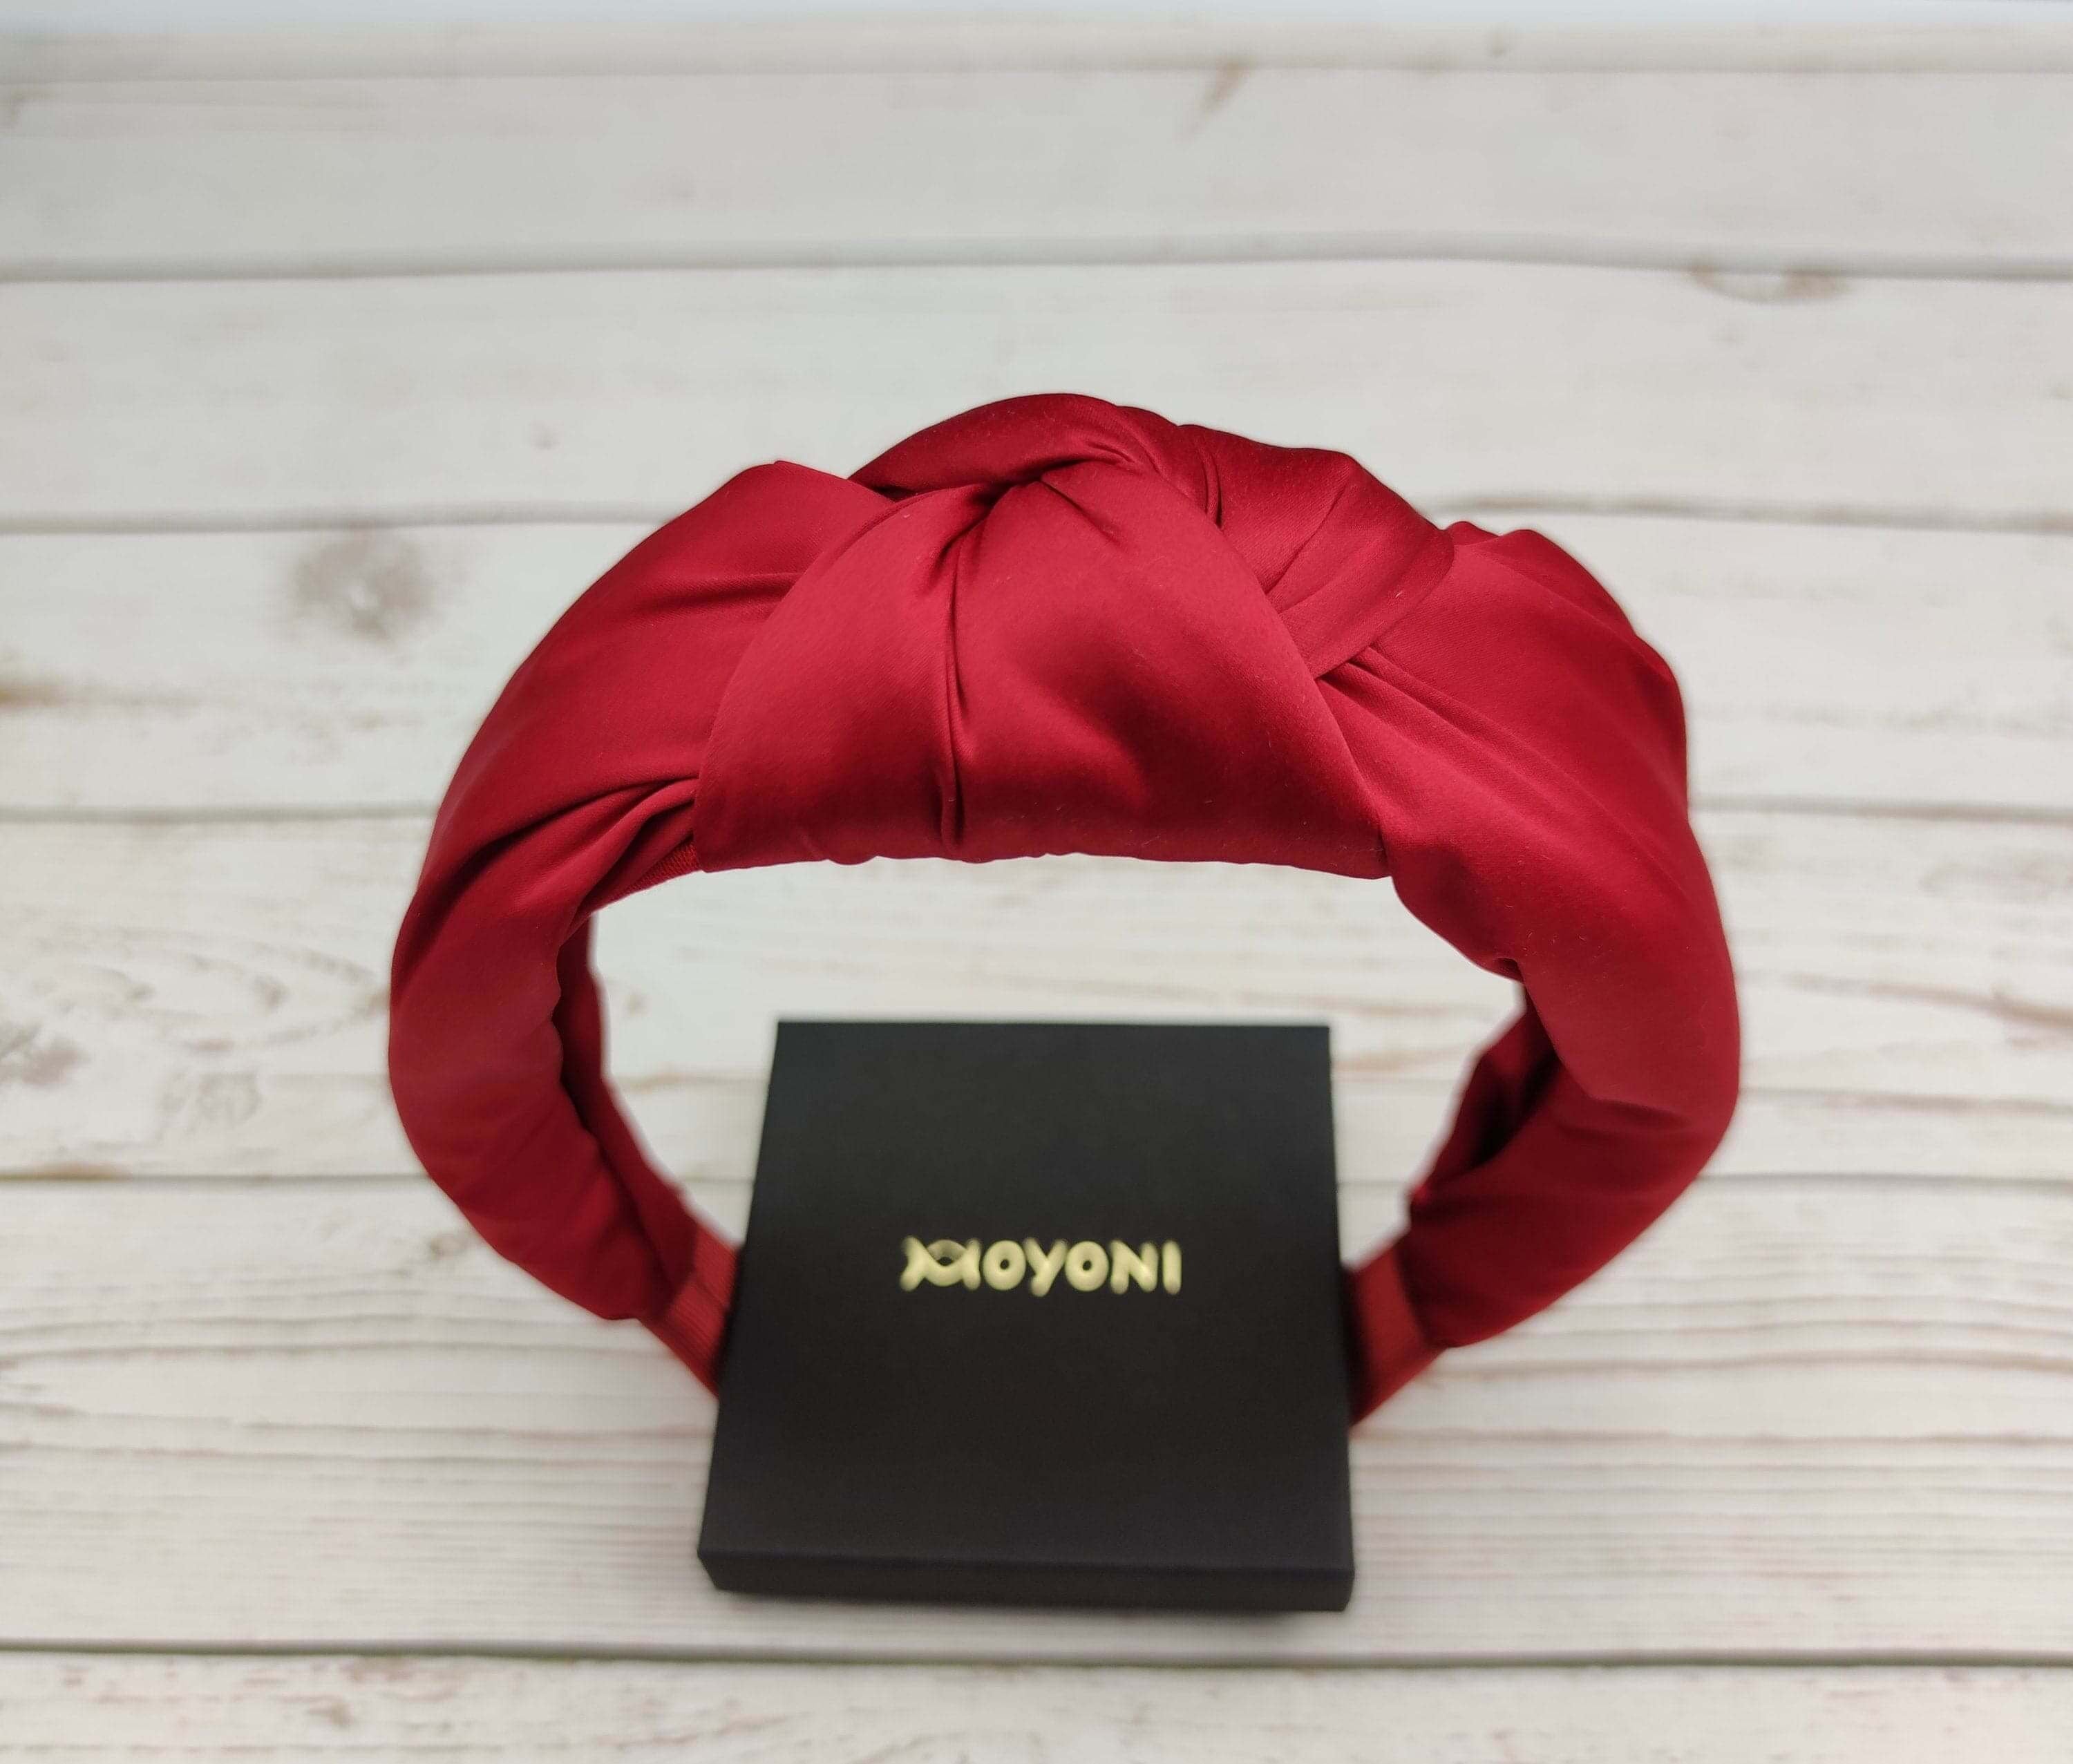 Show her how much you care with this beautifully crafted red satin wide headband.